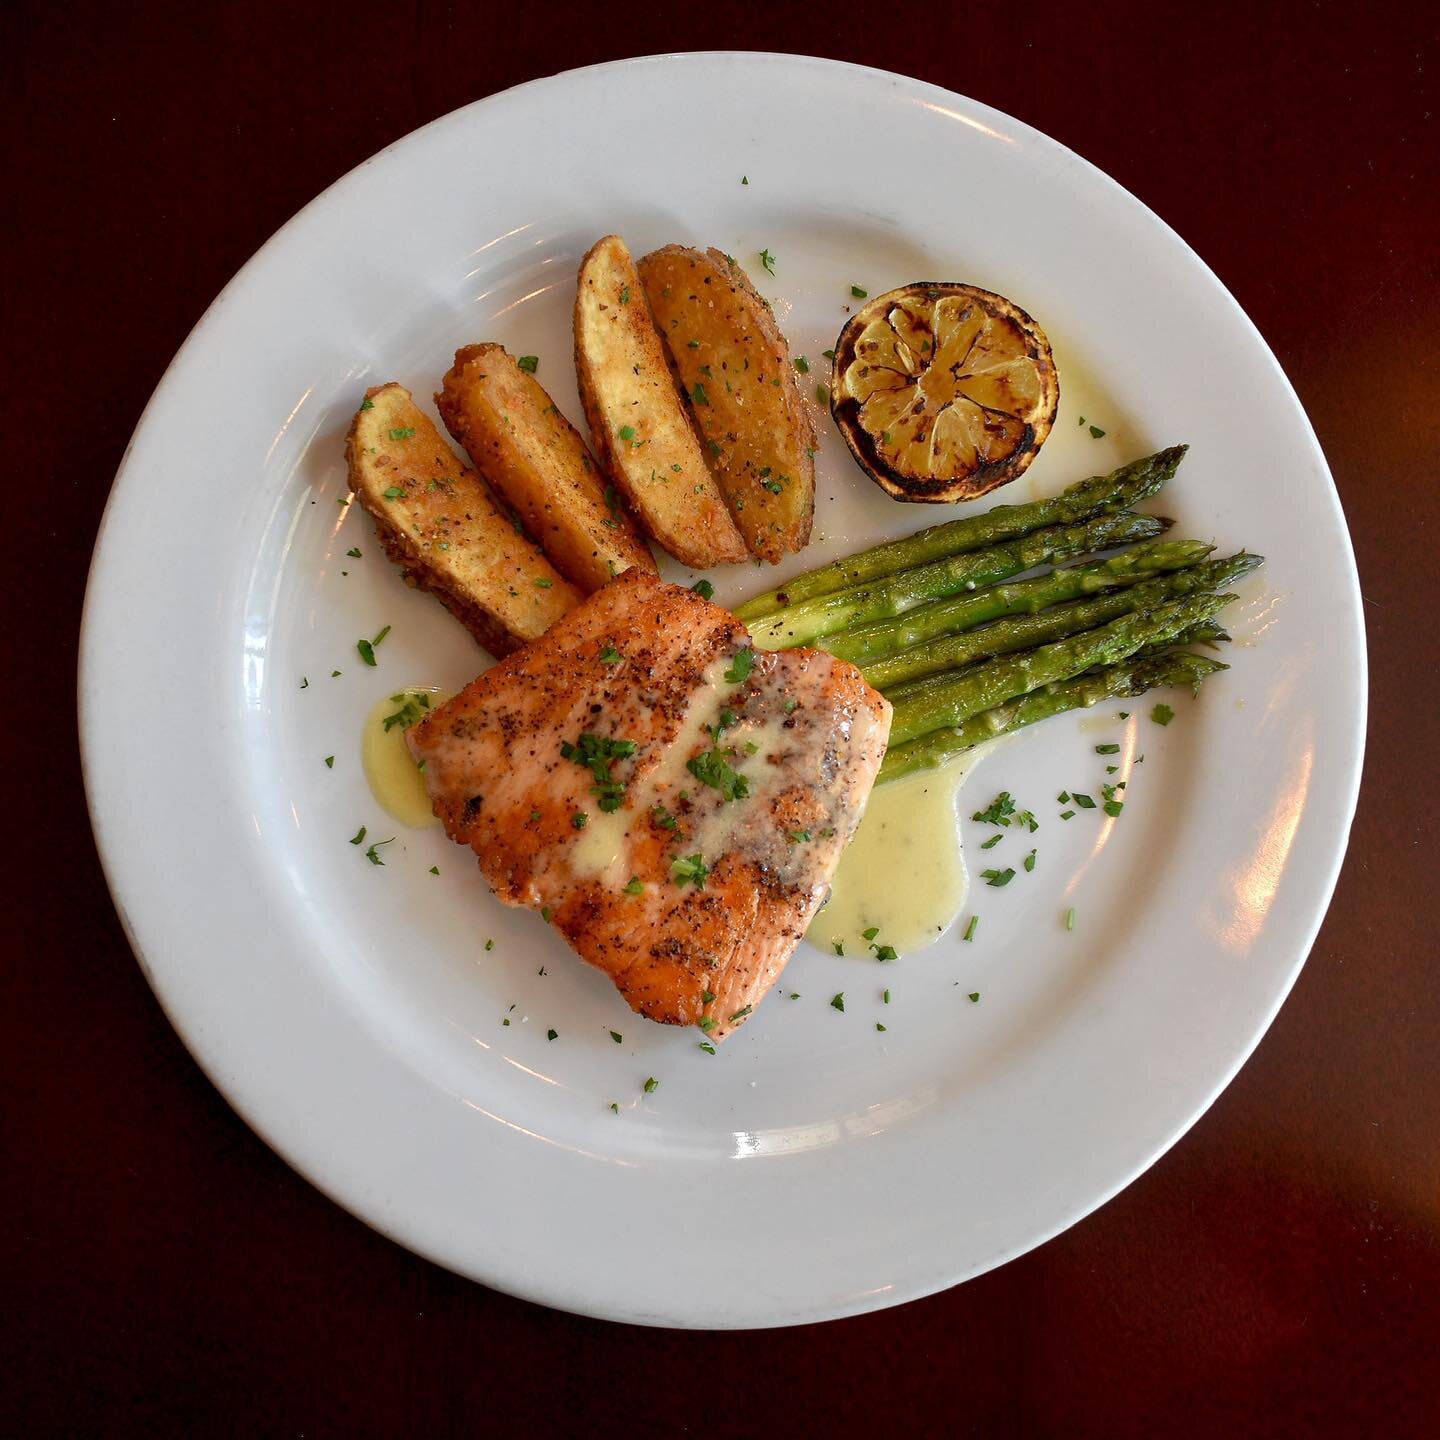 Have you tried our Scottish Salmon?! 😍🤩 #engineco28 #enginecono28 #scottishsalmon #dtla #dtlarestaurant #dtlafoodie